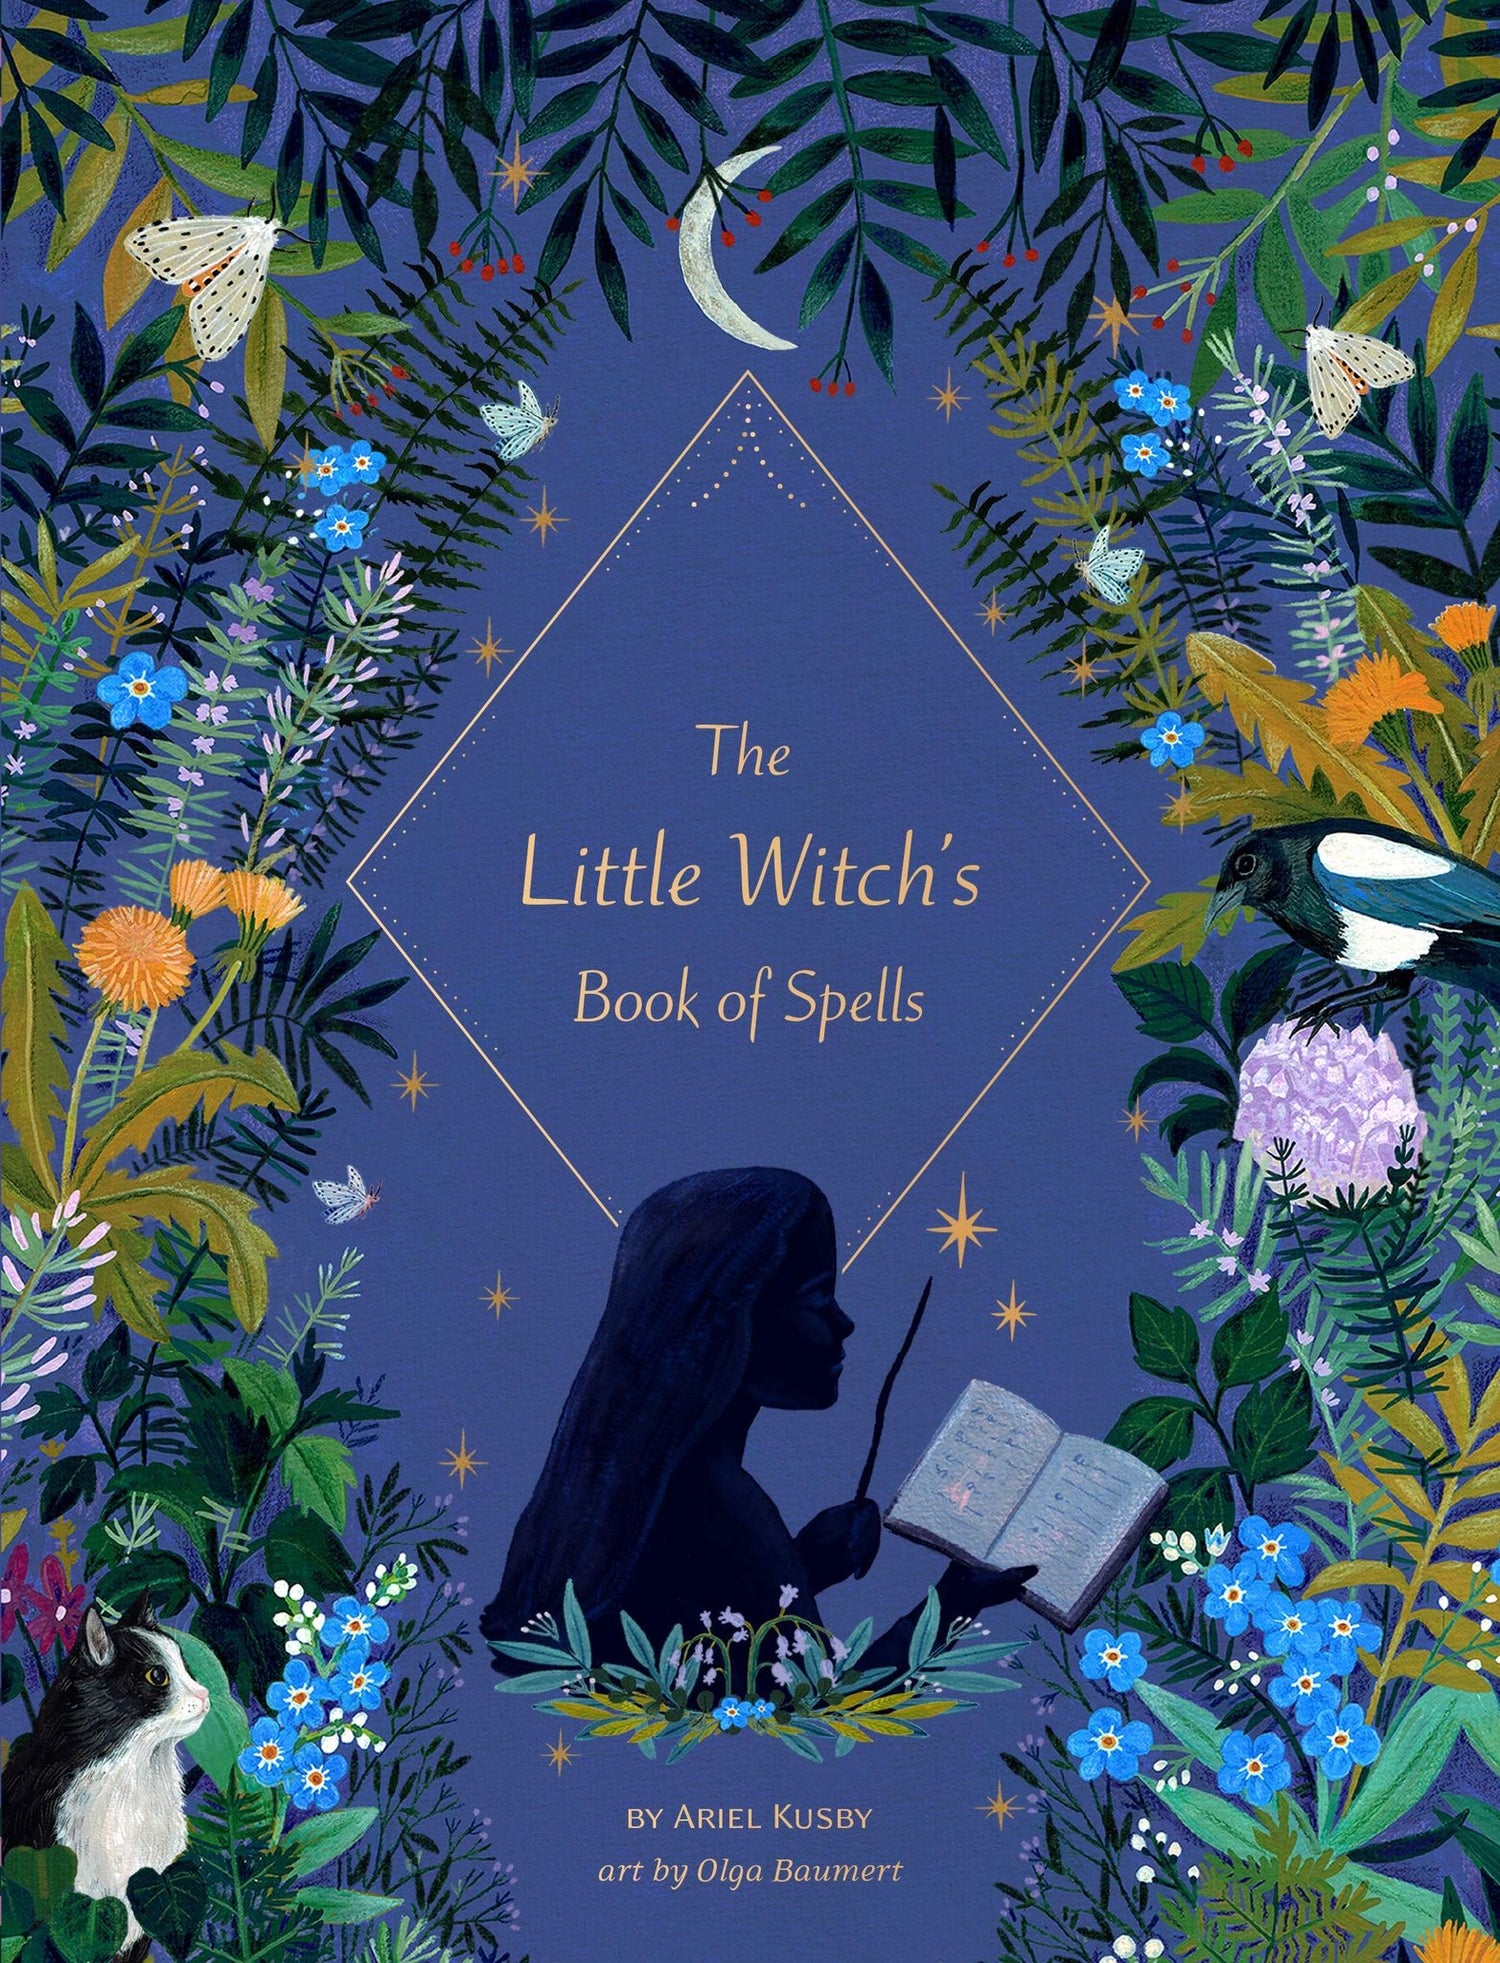 Book cover of The Little Witch's Book of Spells by Ariel Kusby.